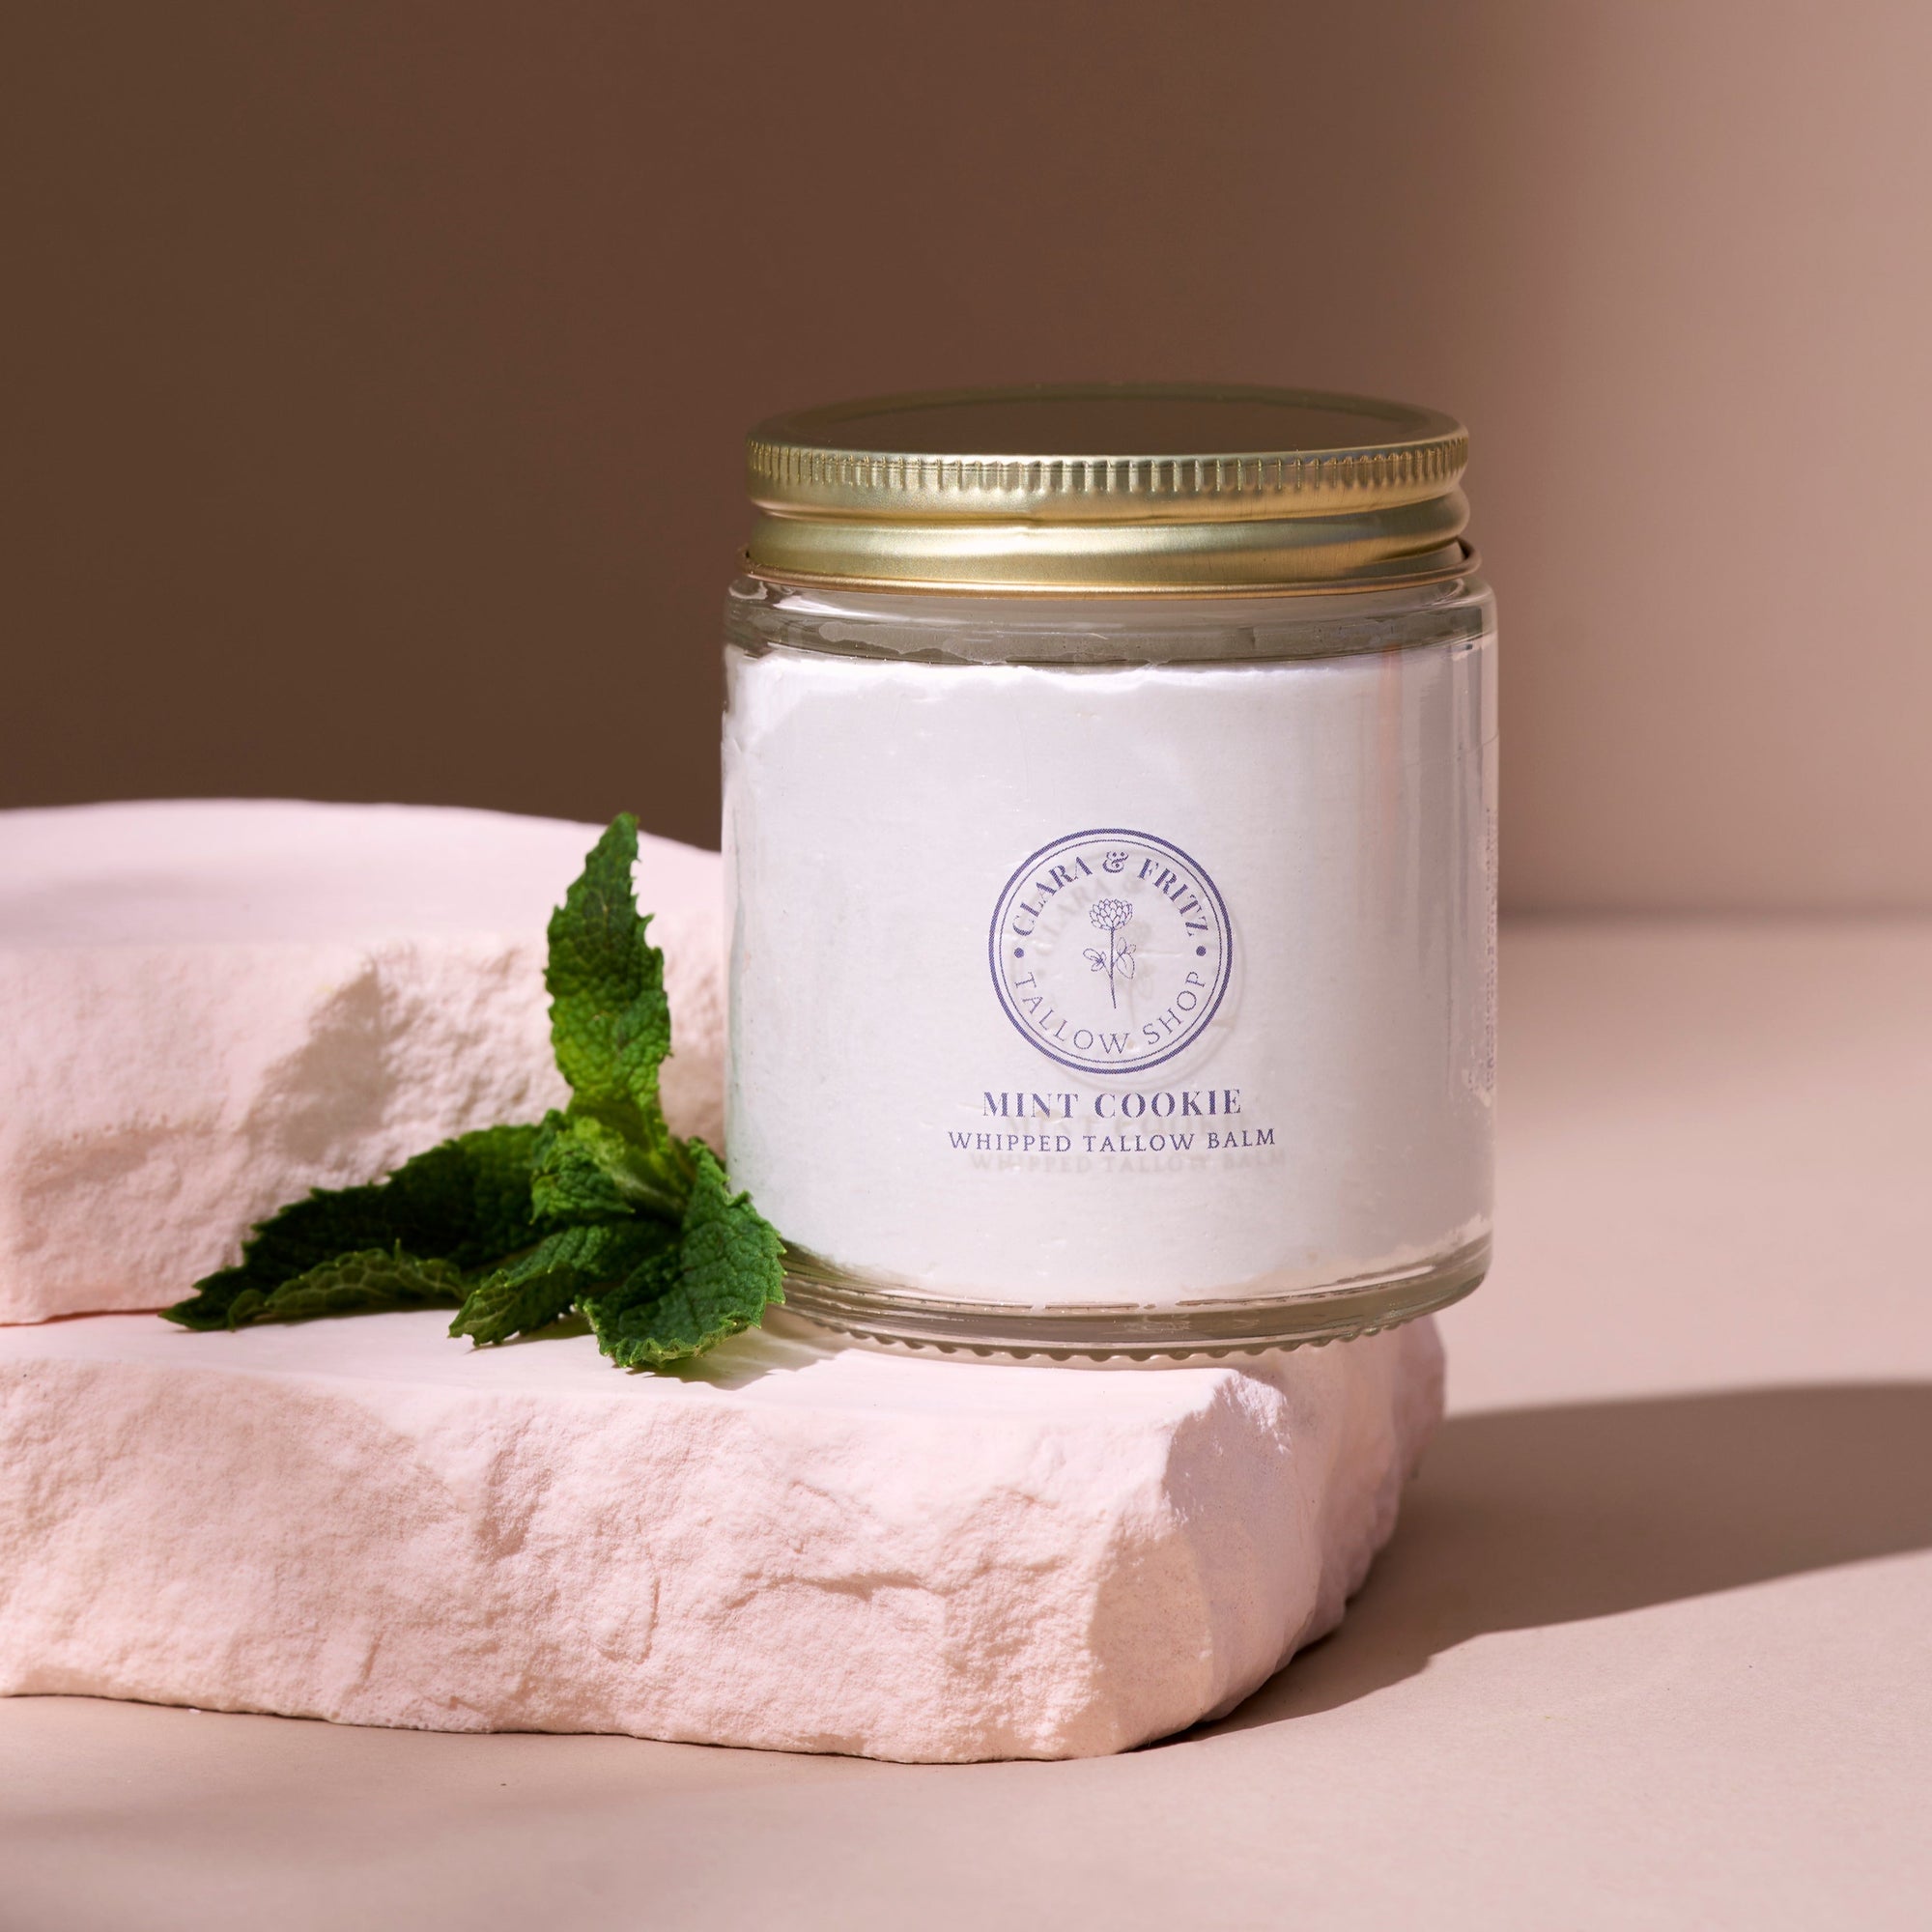 Mint Cookie Whipped Tallow Balm